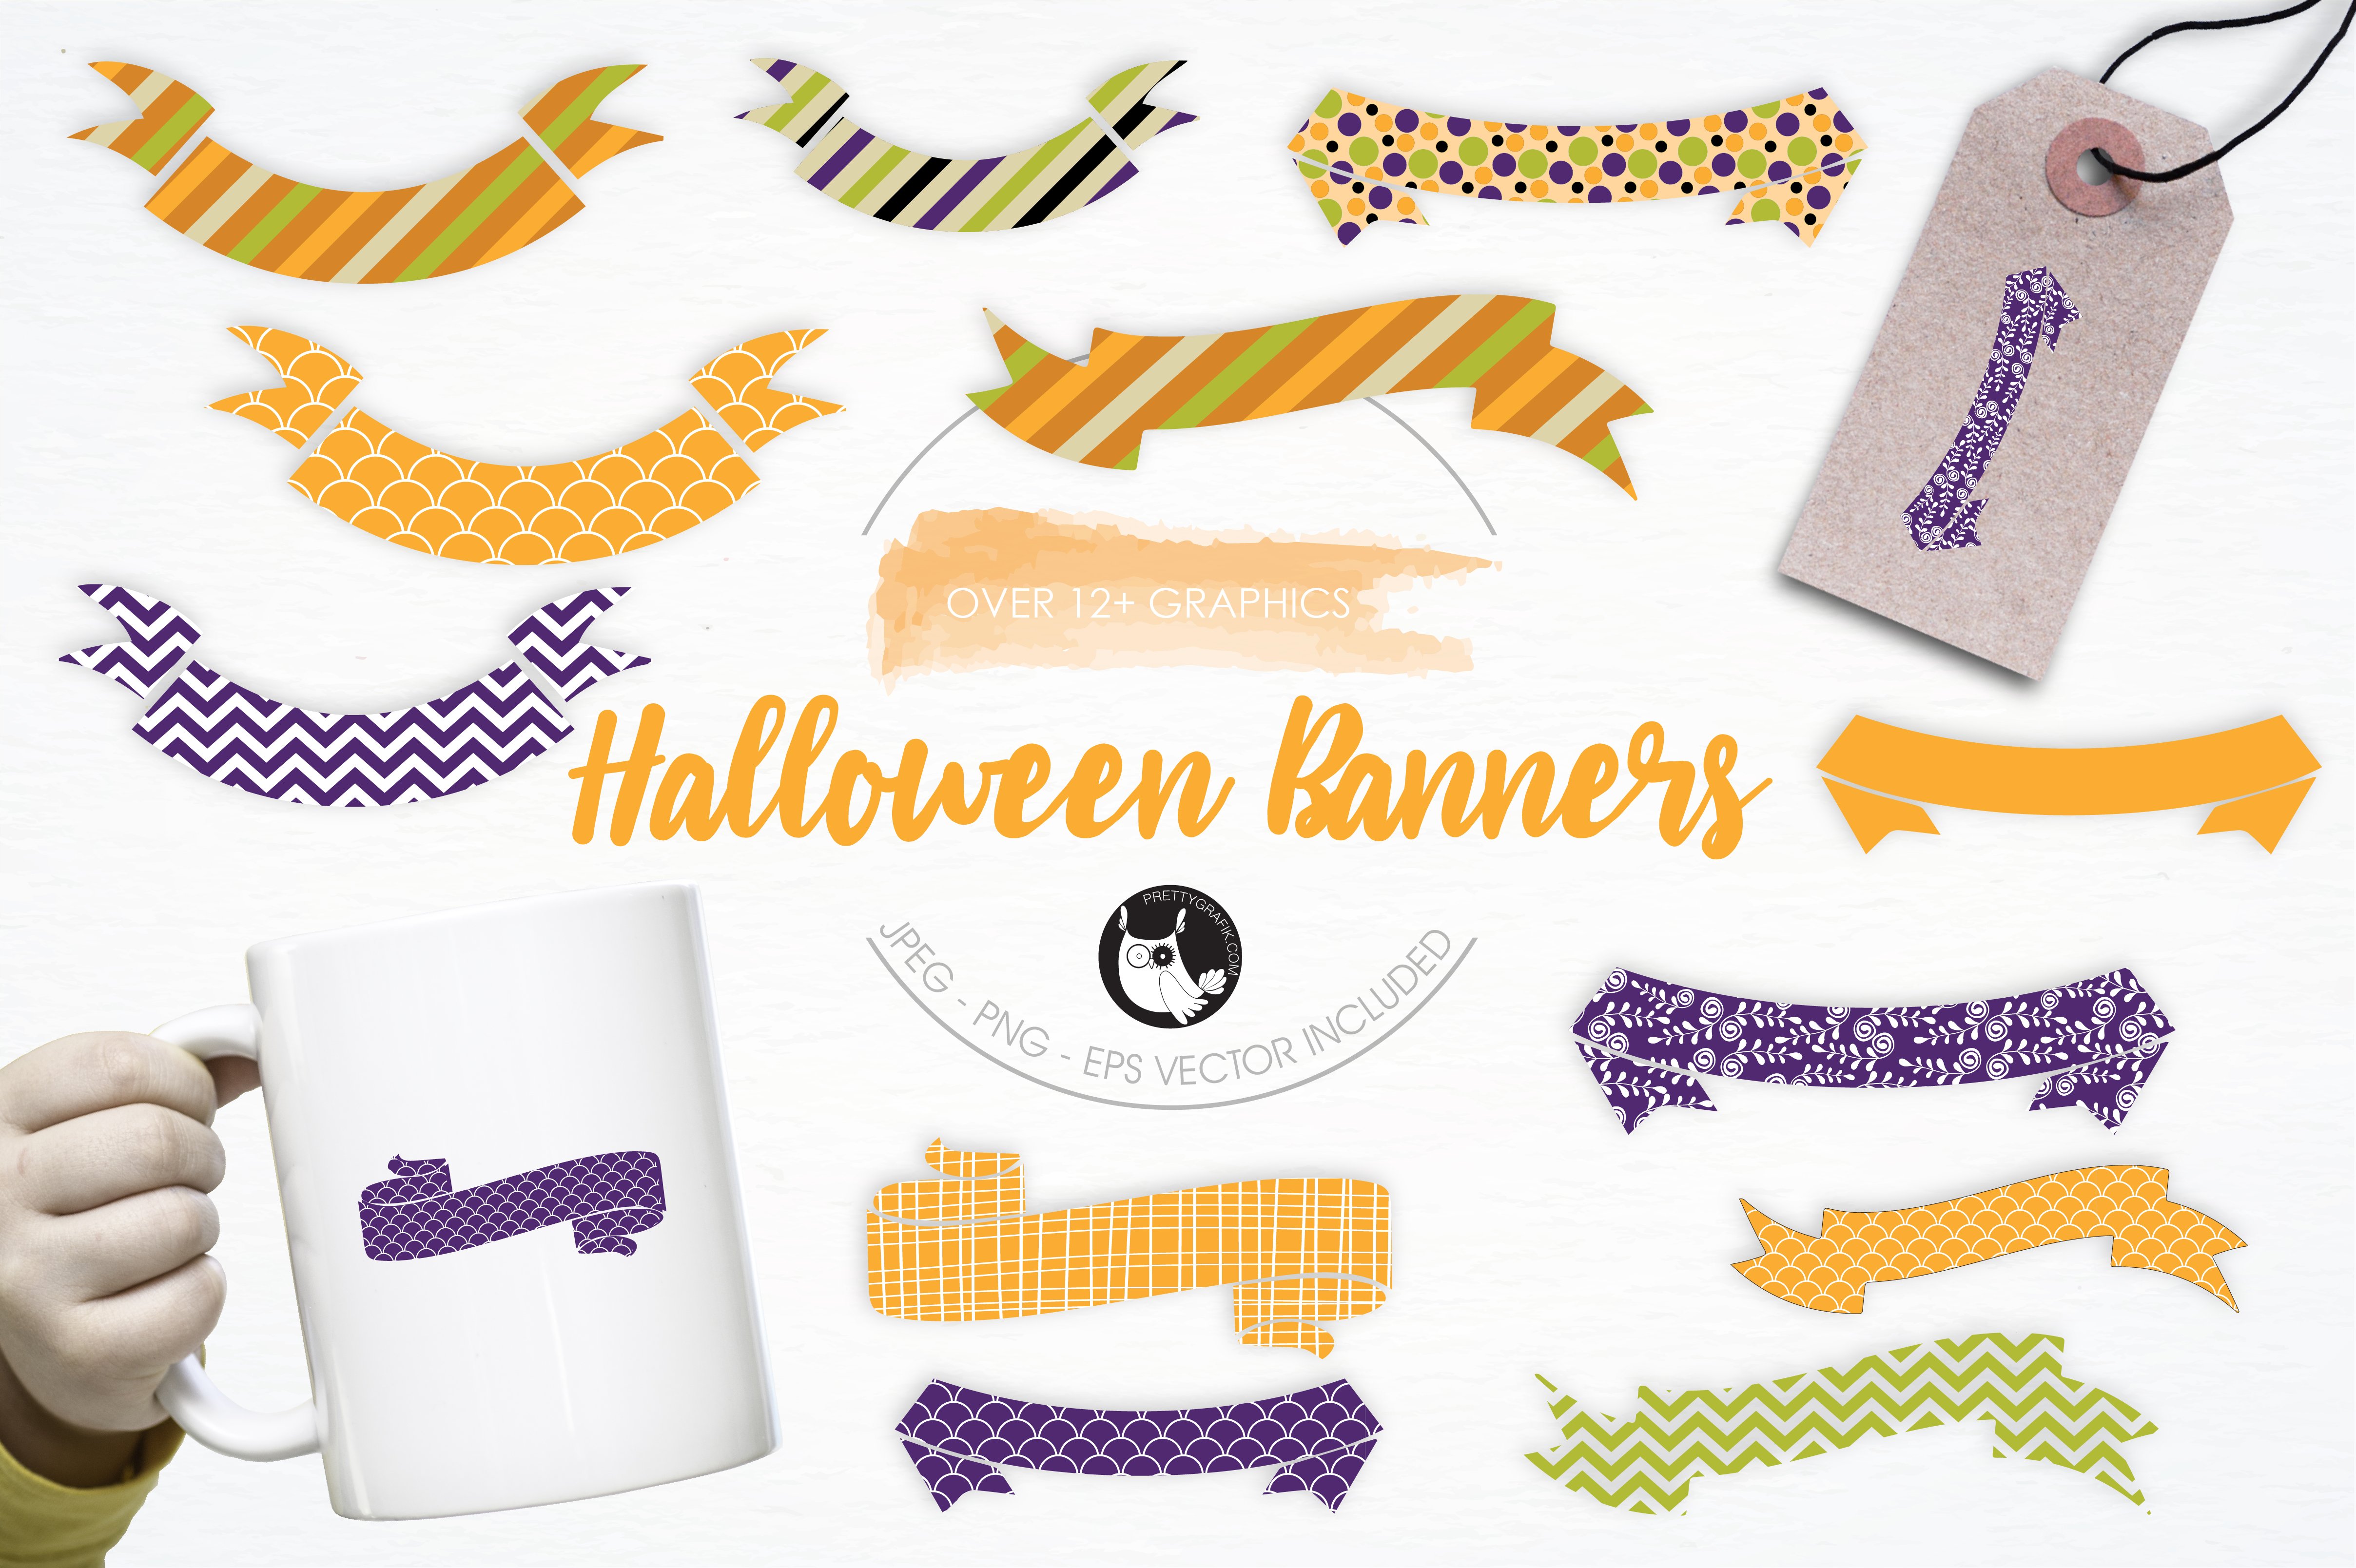 Halloween Banners Illustration Pack - Vector Image